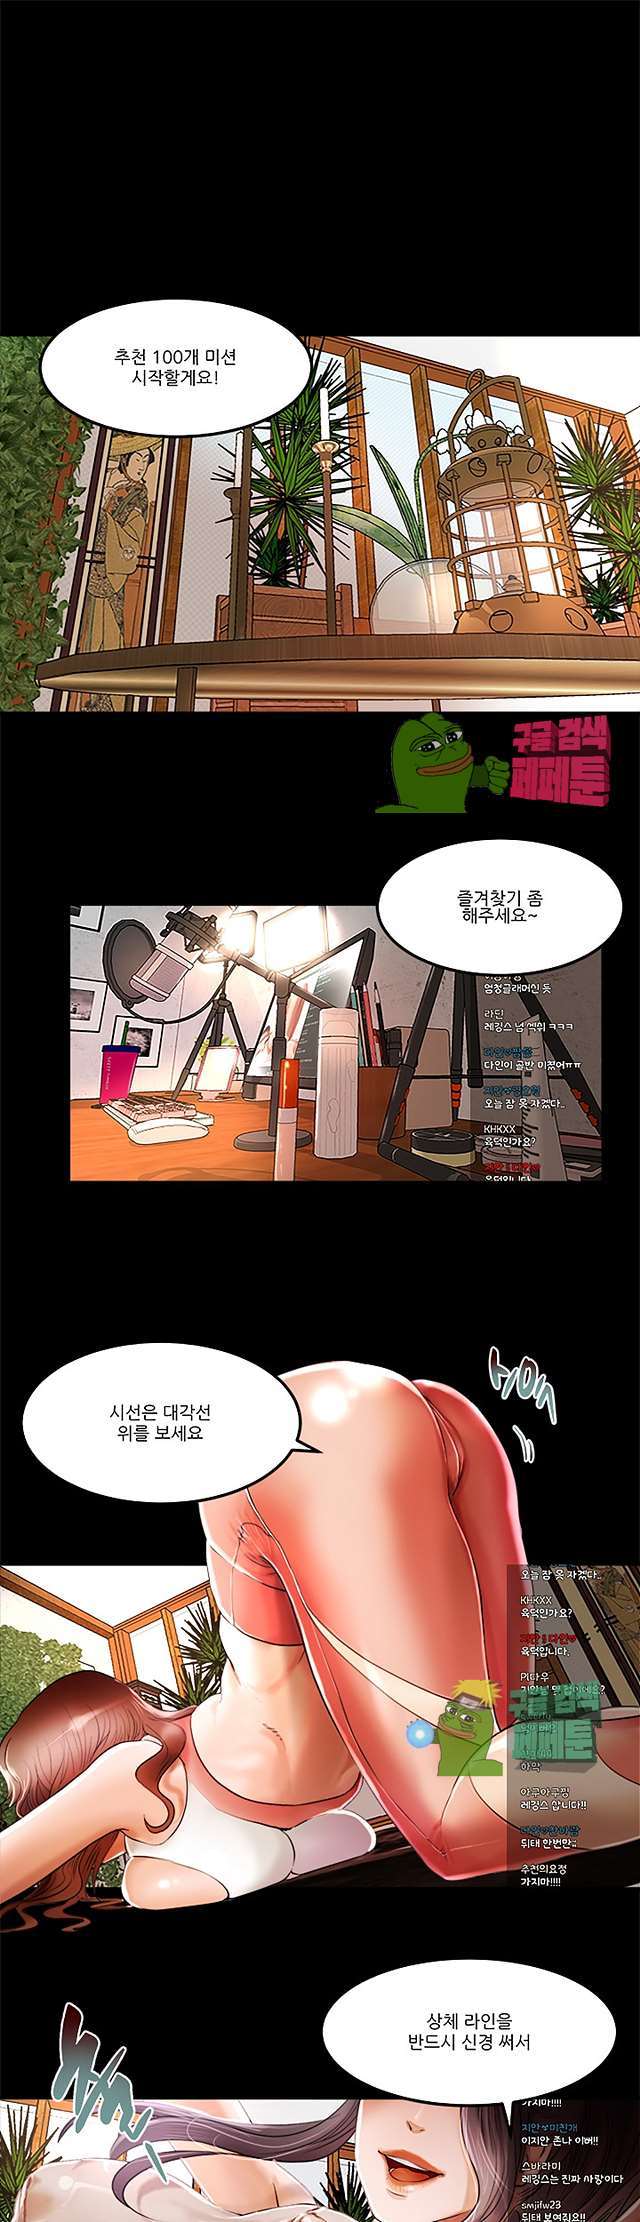 Starballoon Raw - Chapter 1 Page 1